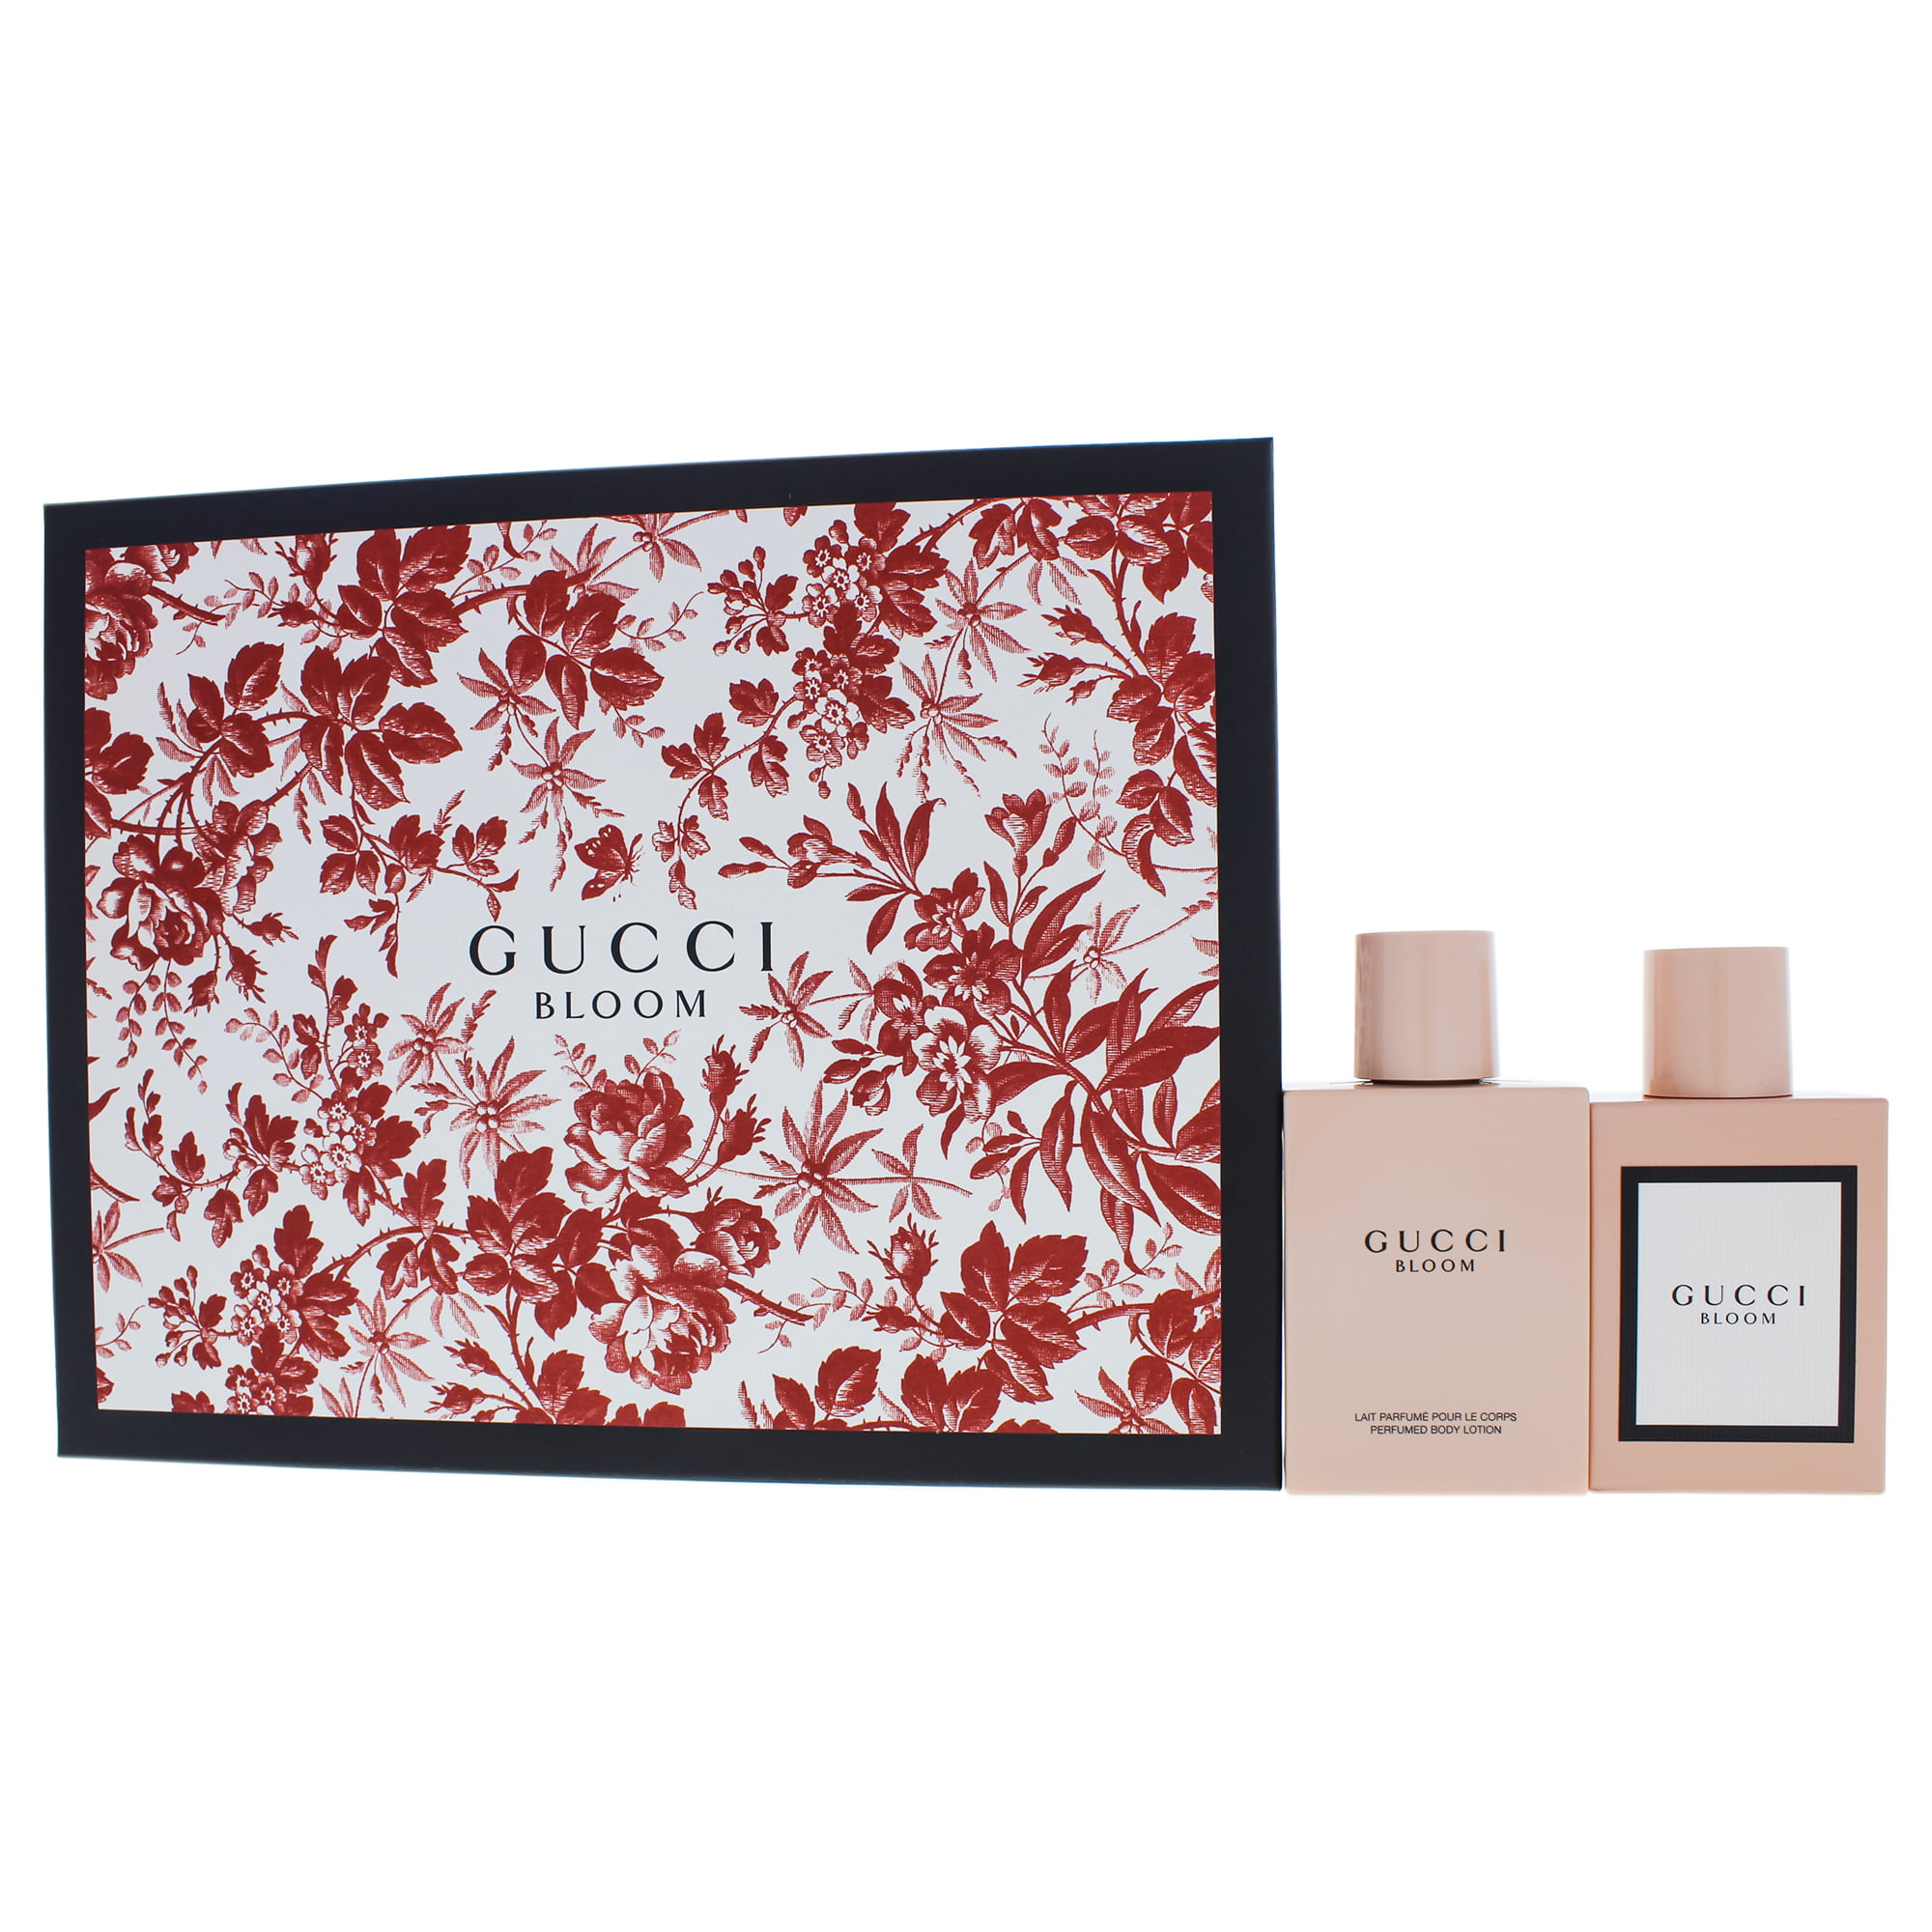 Specialisere Hurtigt galning Gucci Bamboo Perfume Gift Set for Women, 2 Pieces - Walmart.com